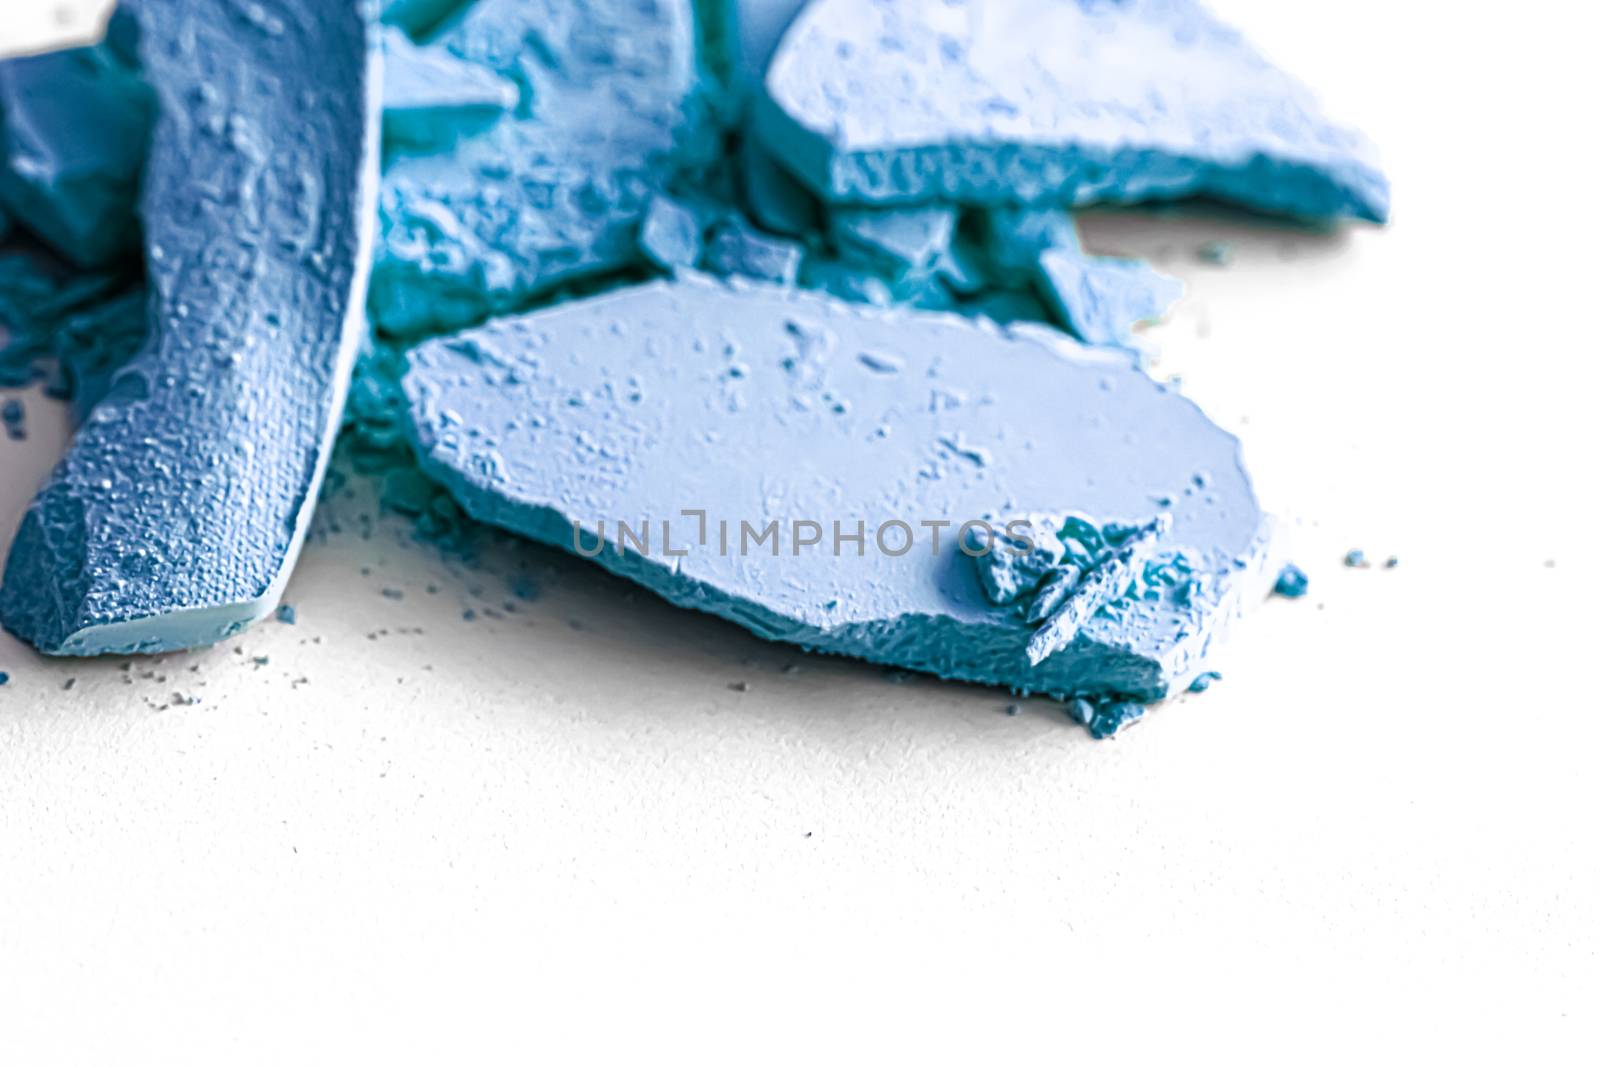 Blue eye shadow powder as makeup palette closeup isolated on white background, crushed cosmetics and beauty textures